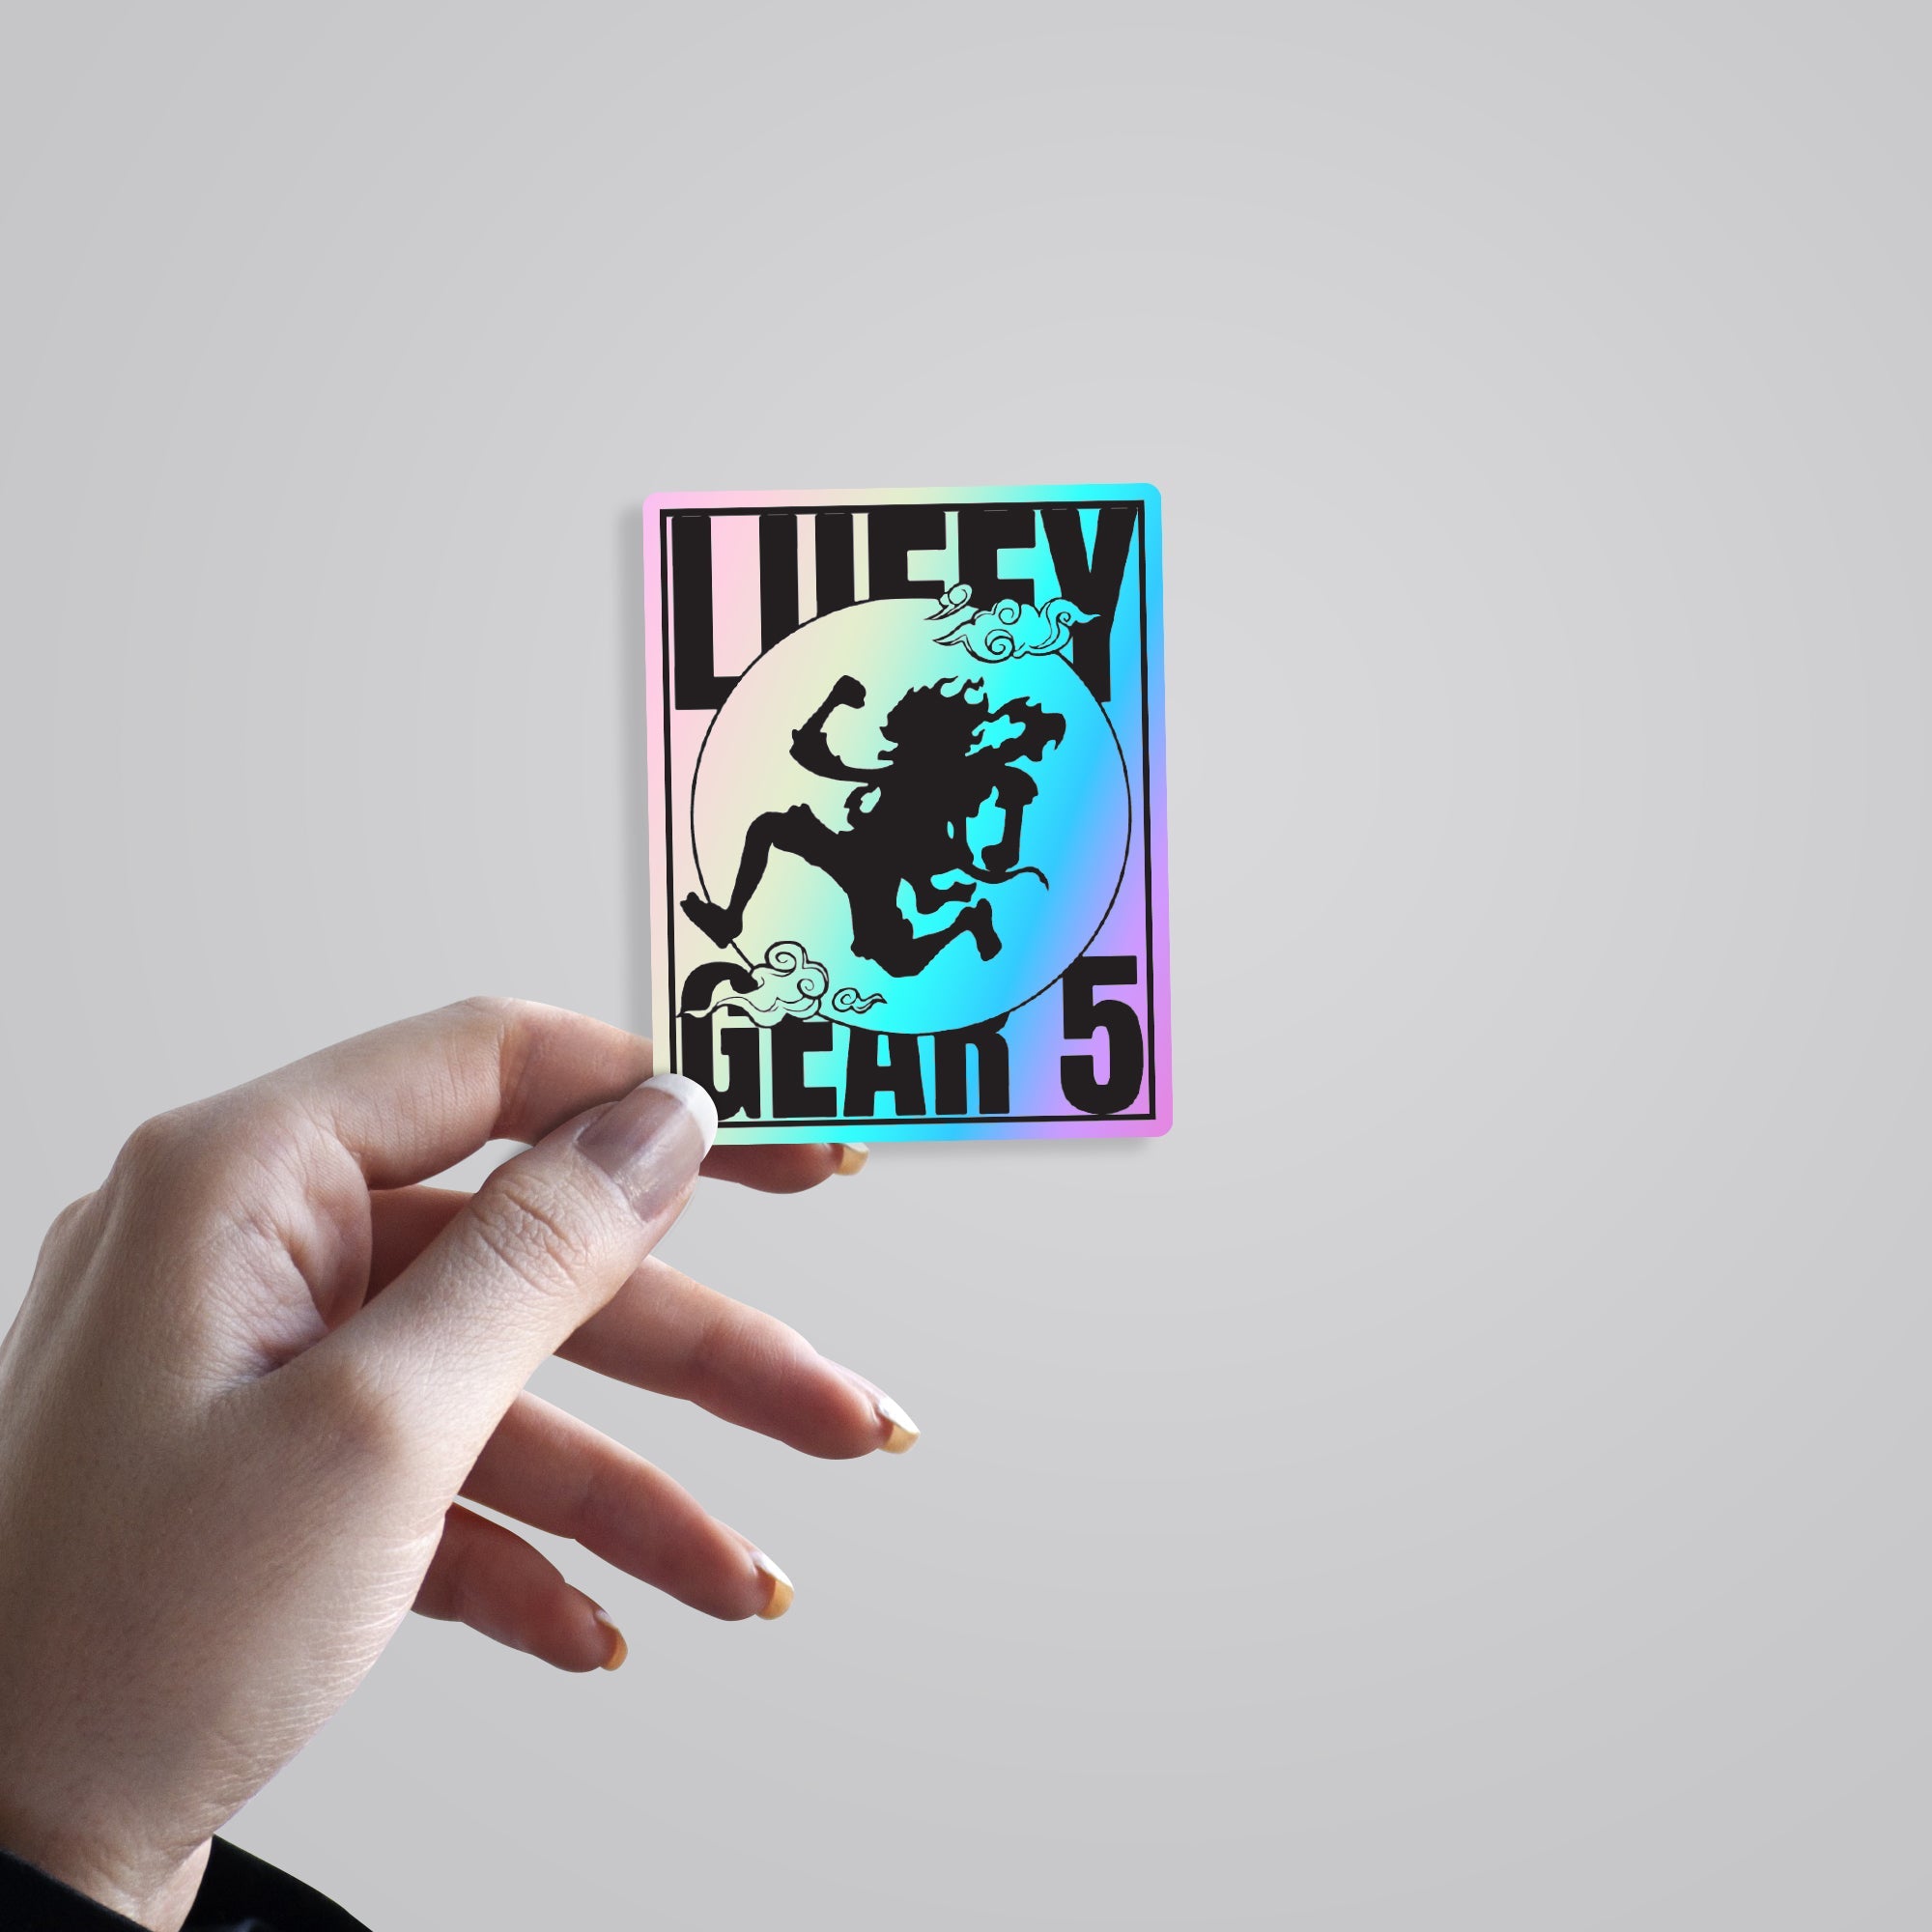 Luffy Gear 5 Holographic Stickers